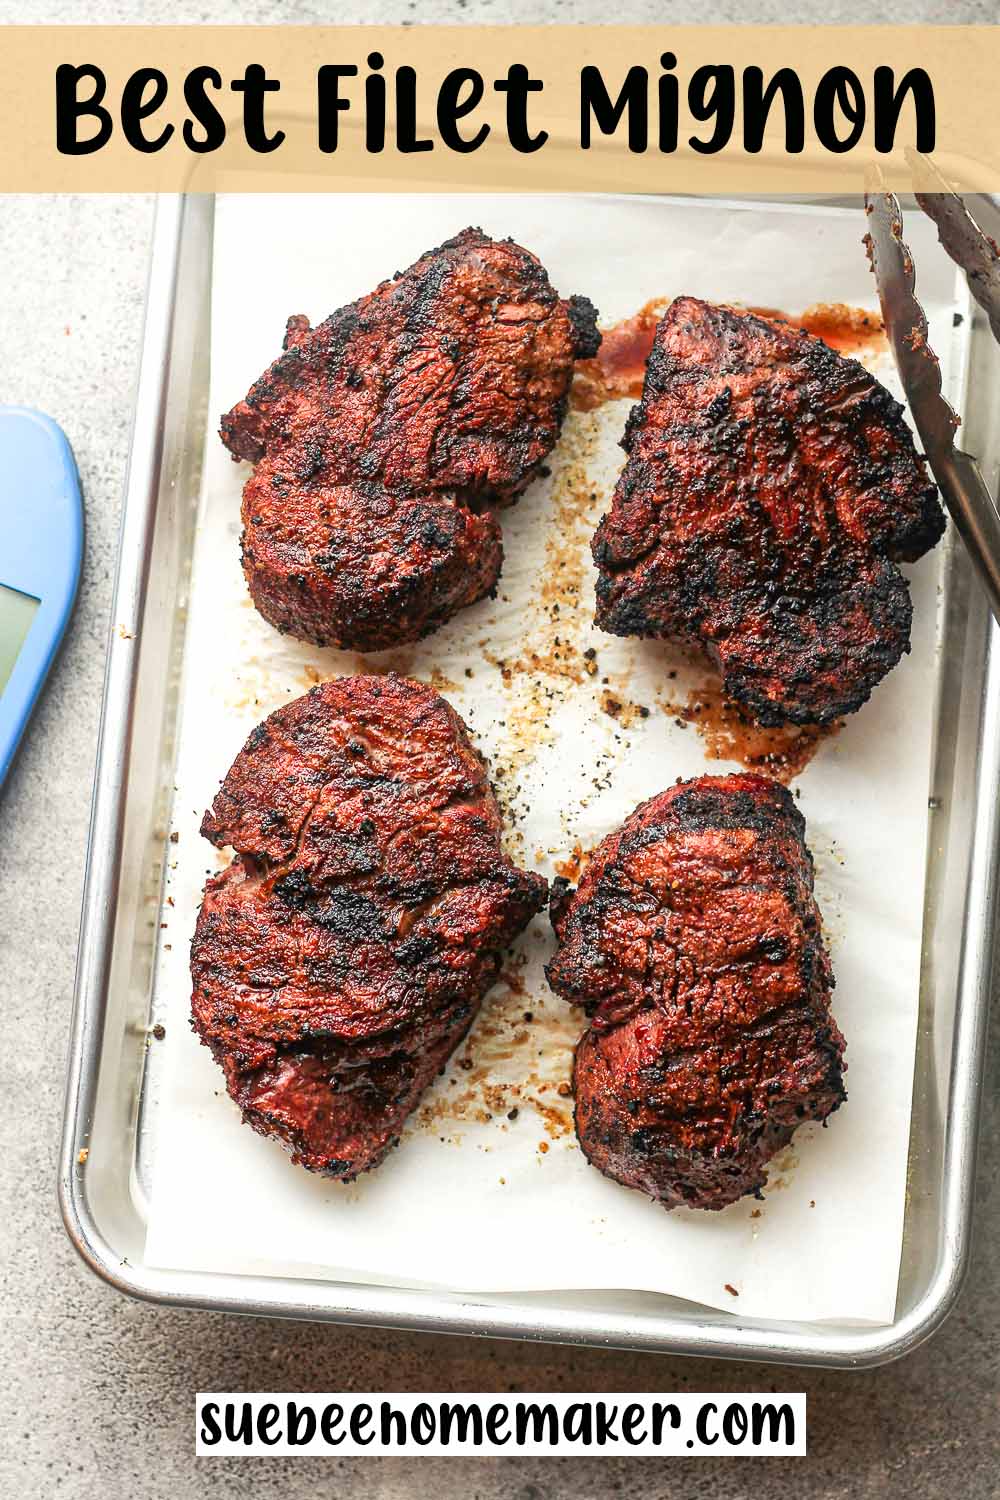 A tray of the Best filet mignon after grilling.